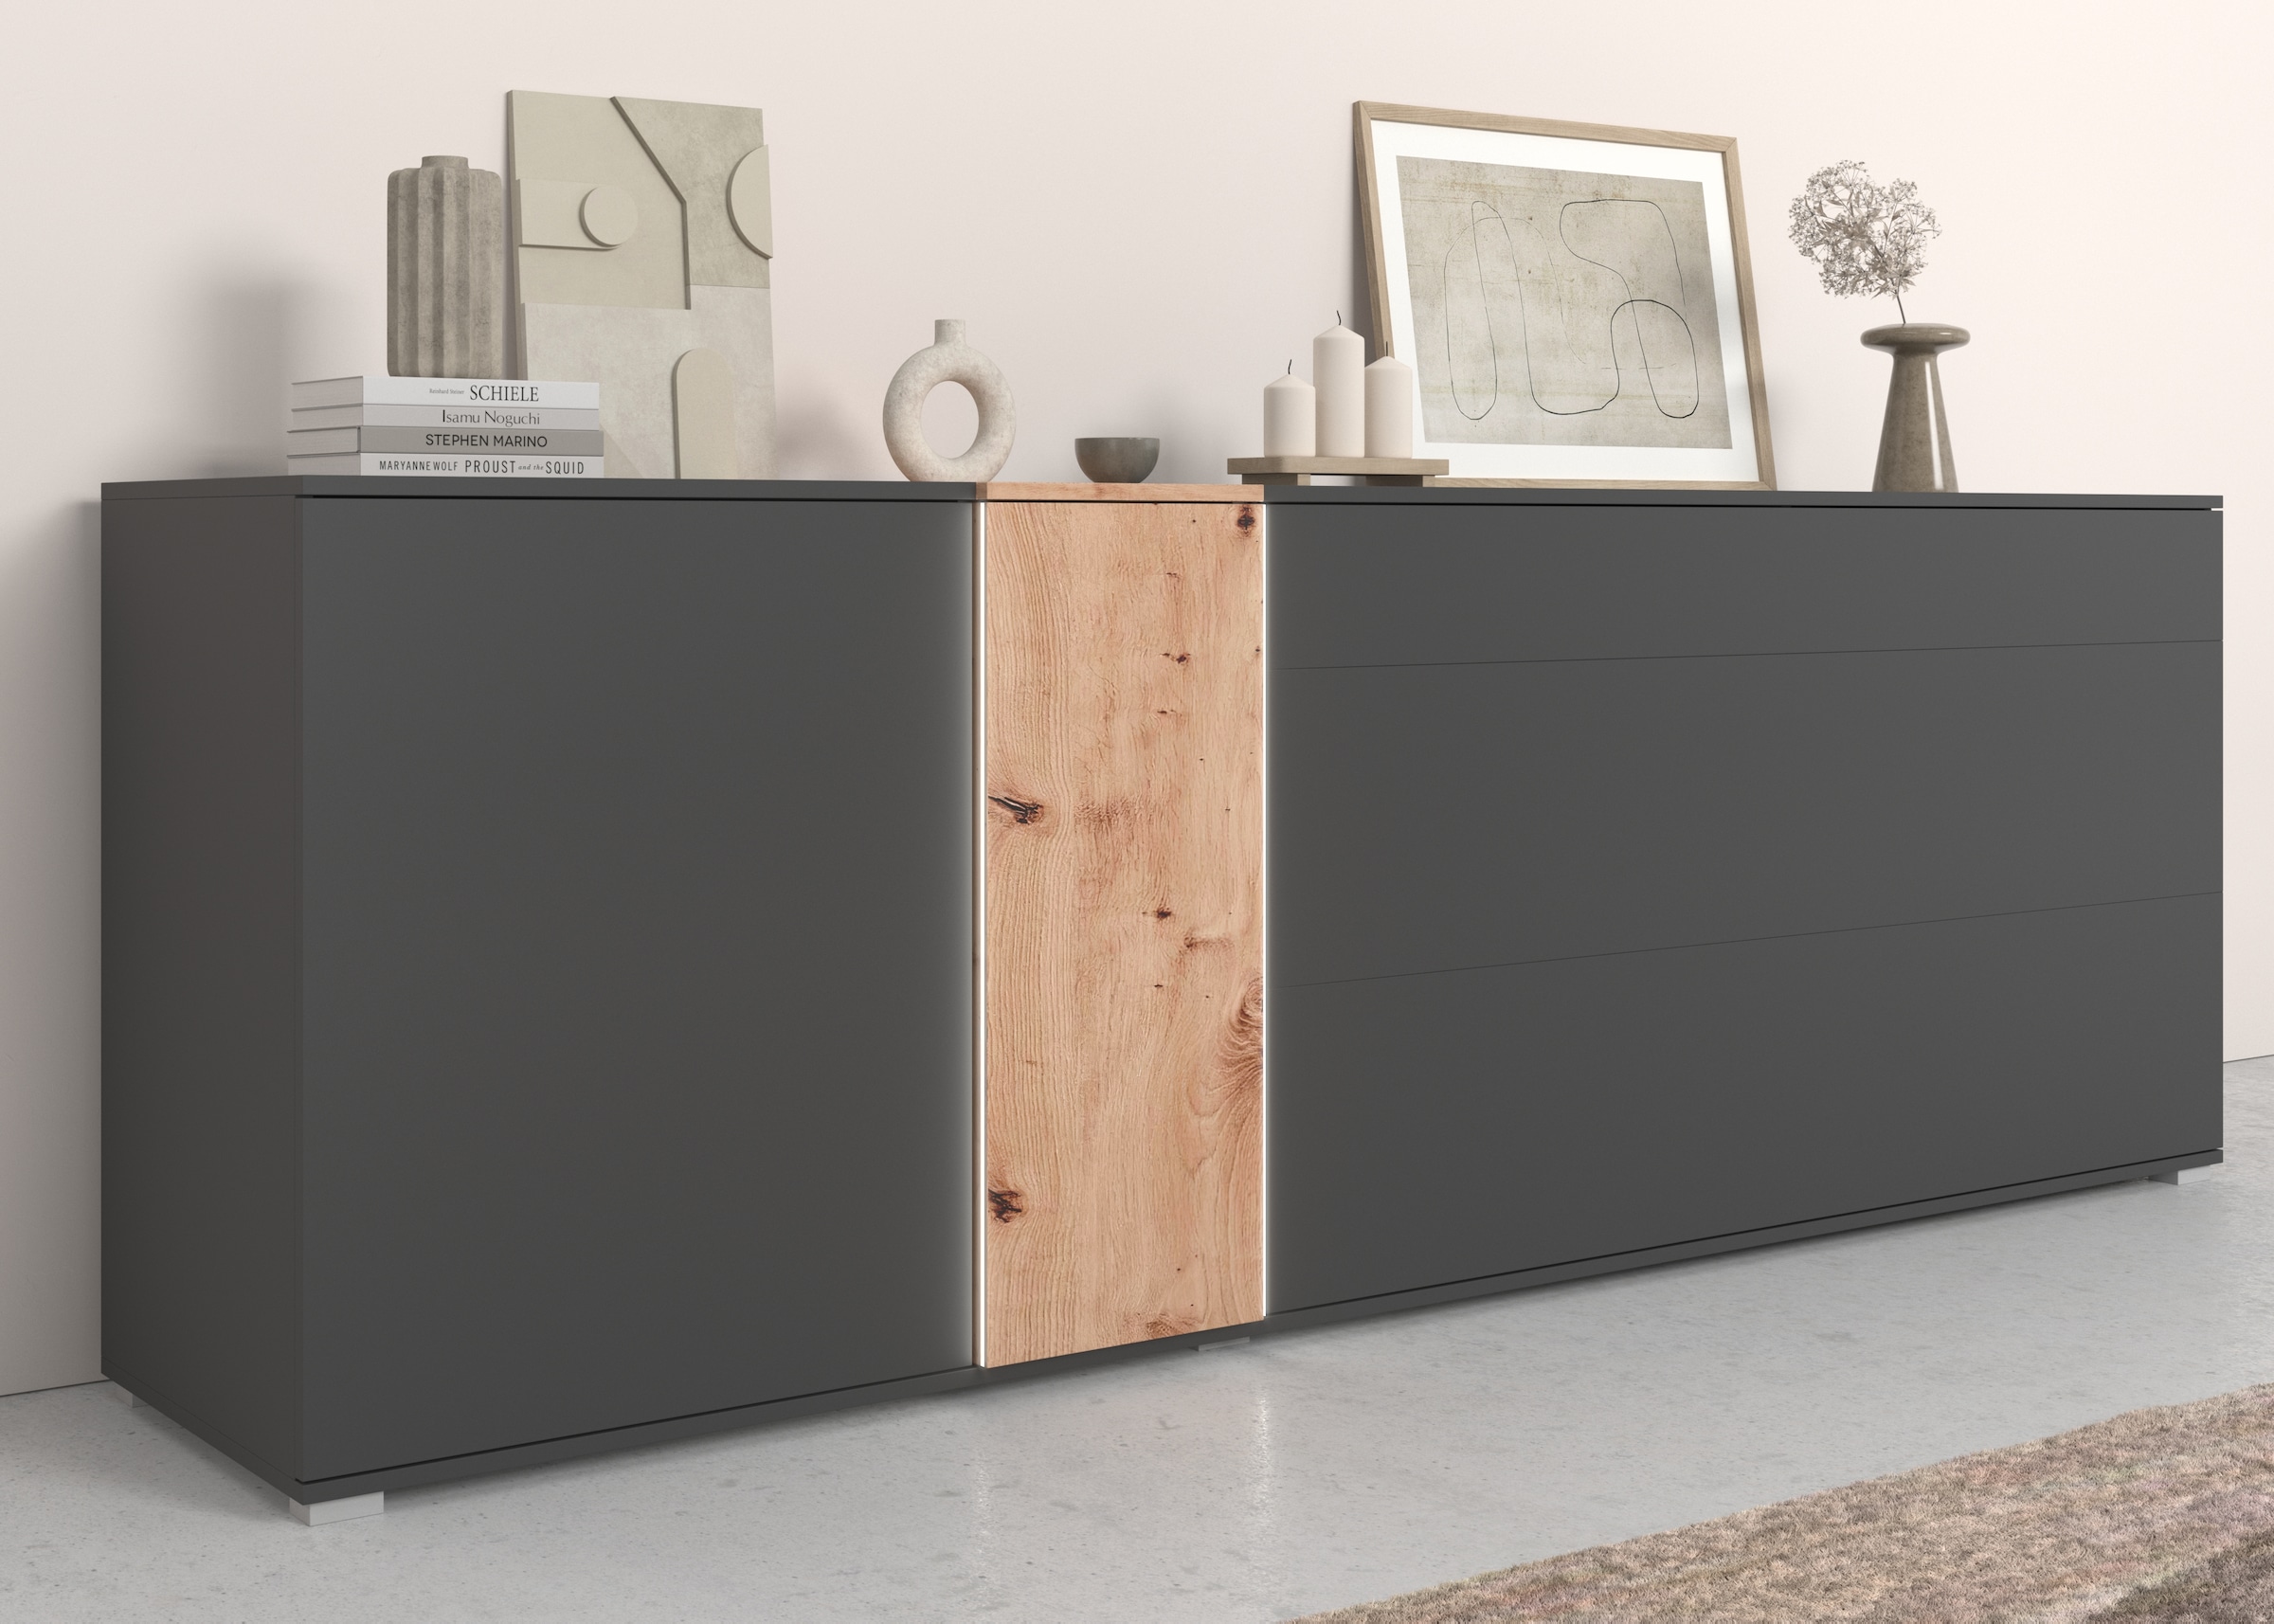 COTTA Sideboard »Montana«, Breite 235 cm, inkl. LED-Beleuchtung und Push-To-Open